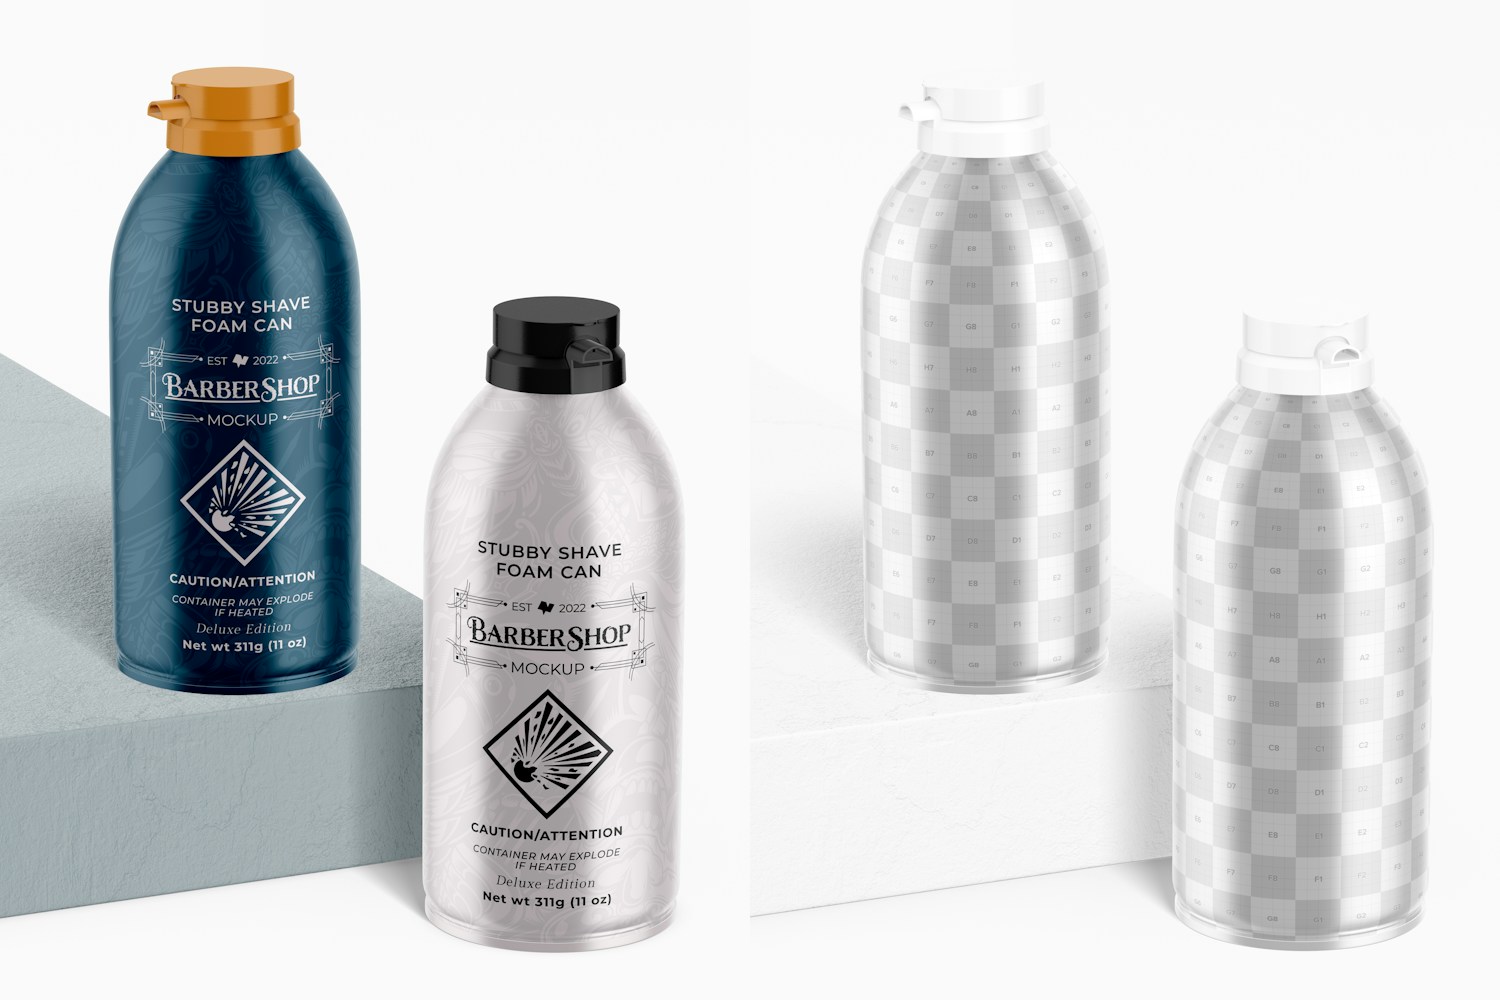 Stubby Shave Foam Cans Mockup